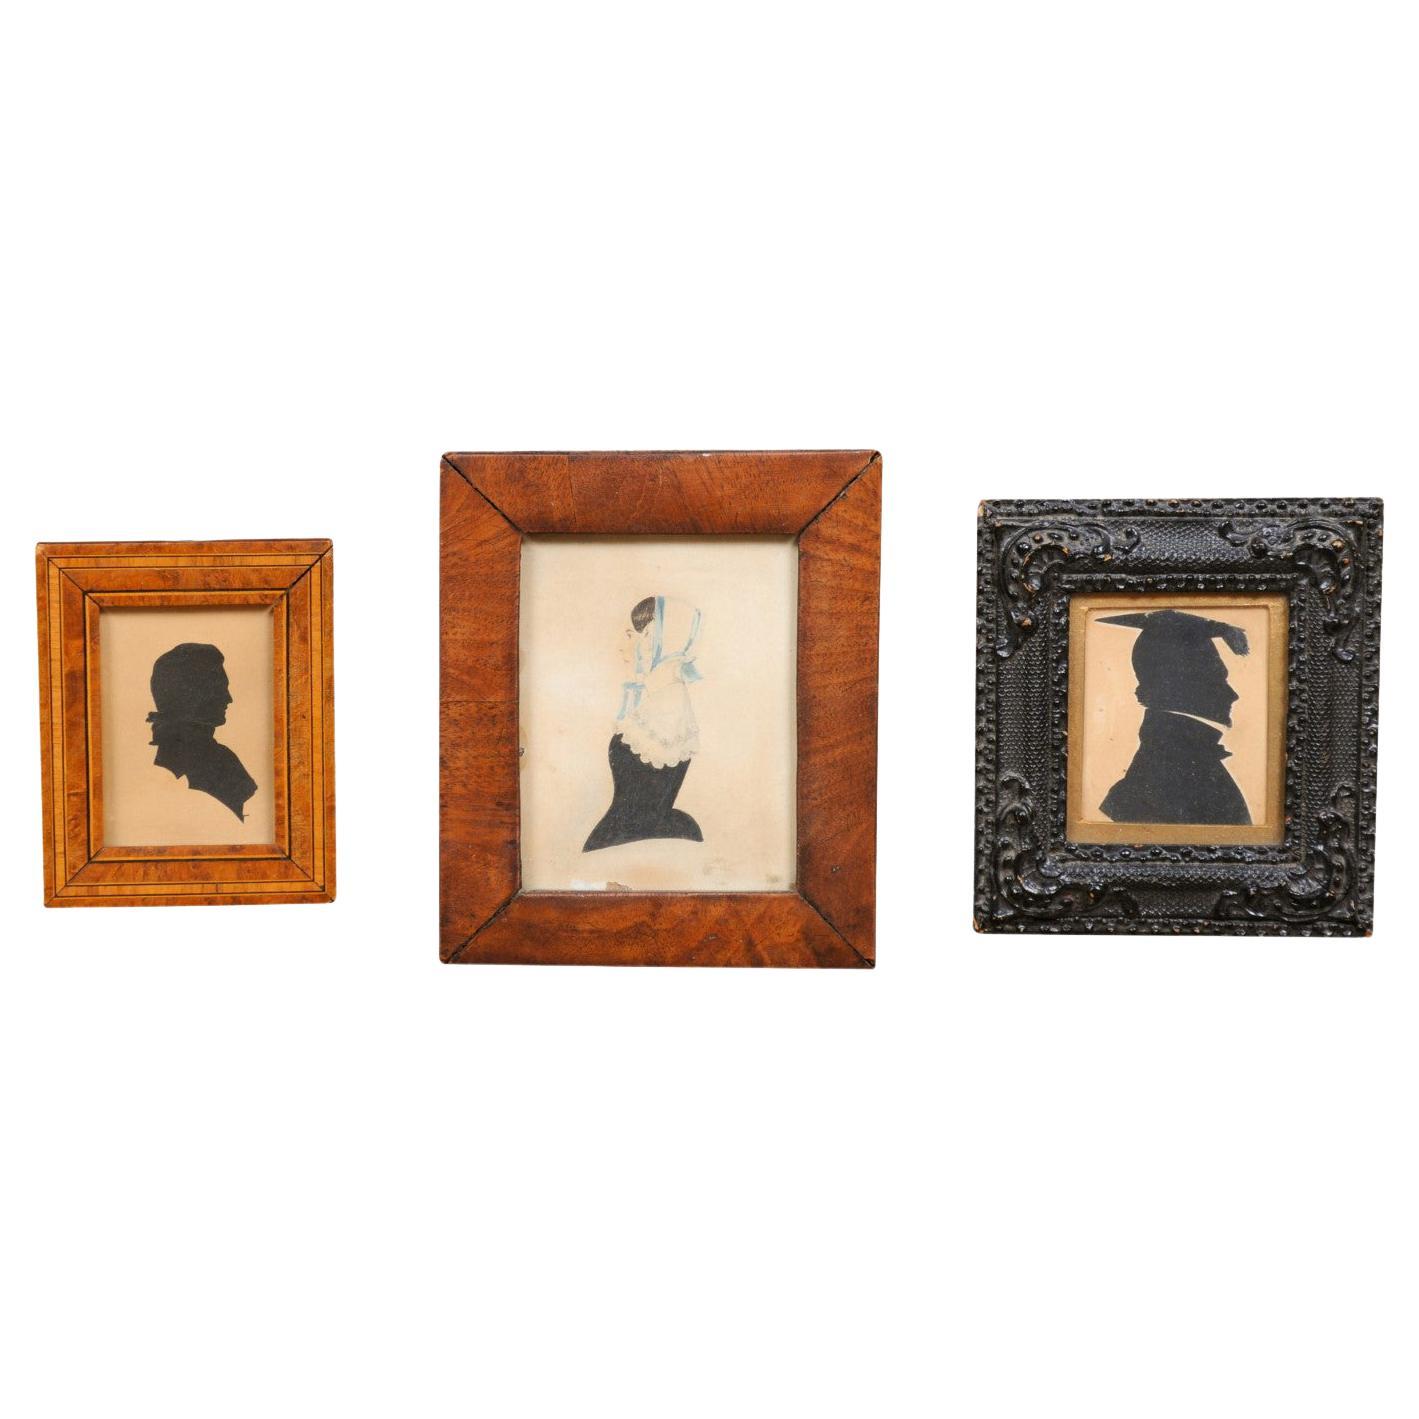 Set of Three English Victorian Period Framed Wooden Silhouette Miniatures